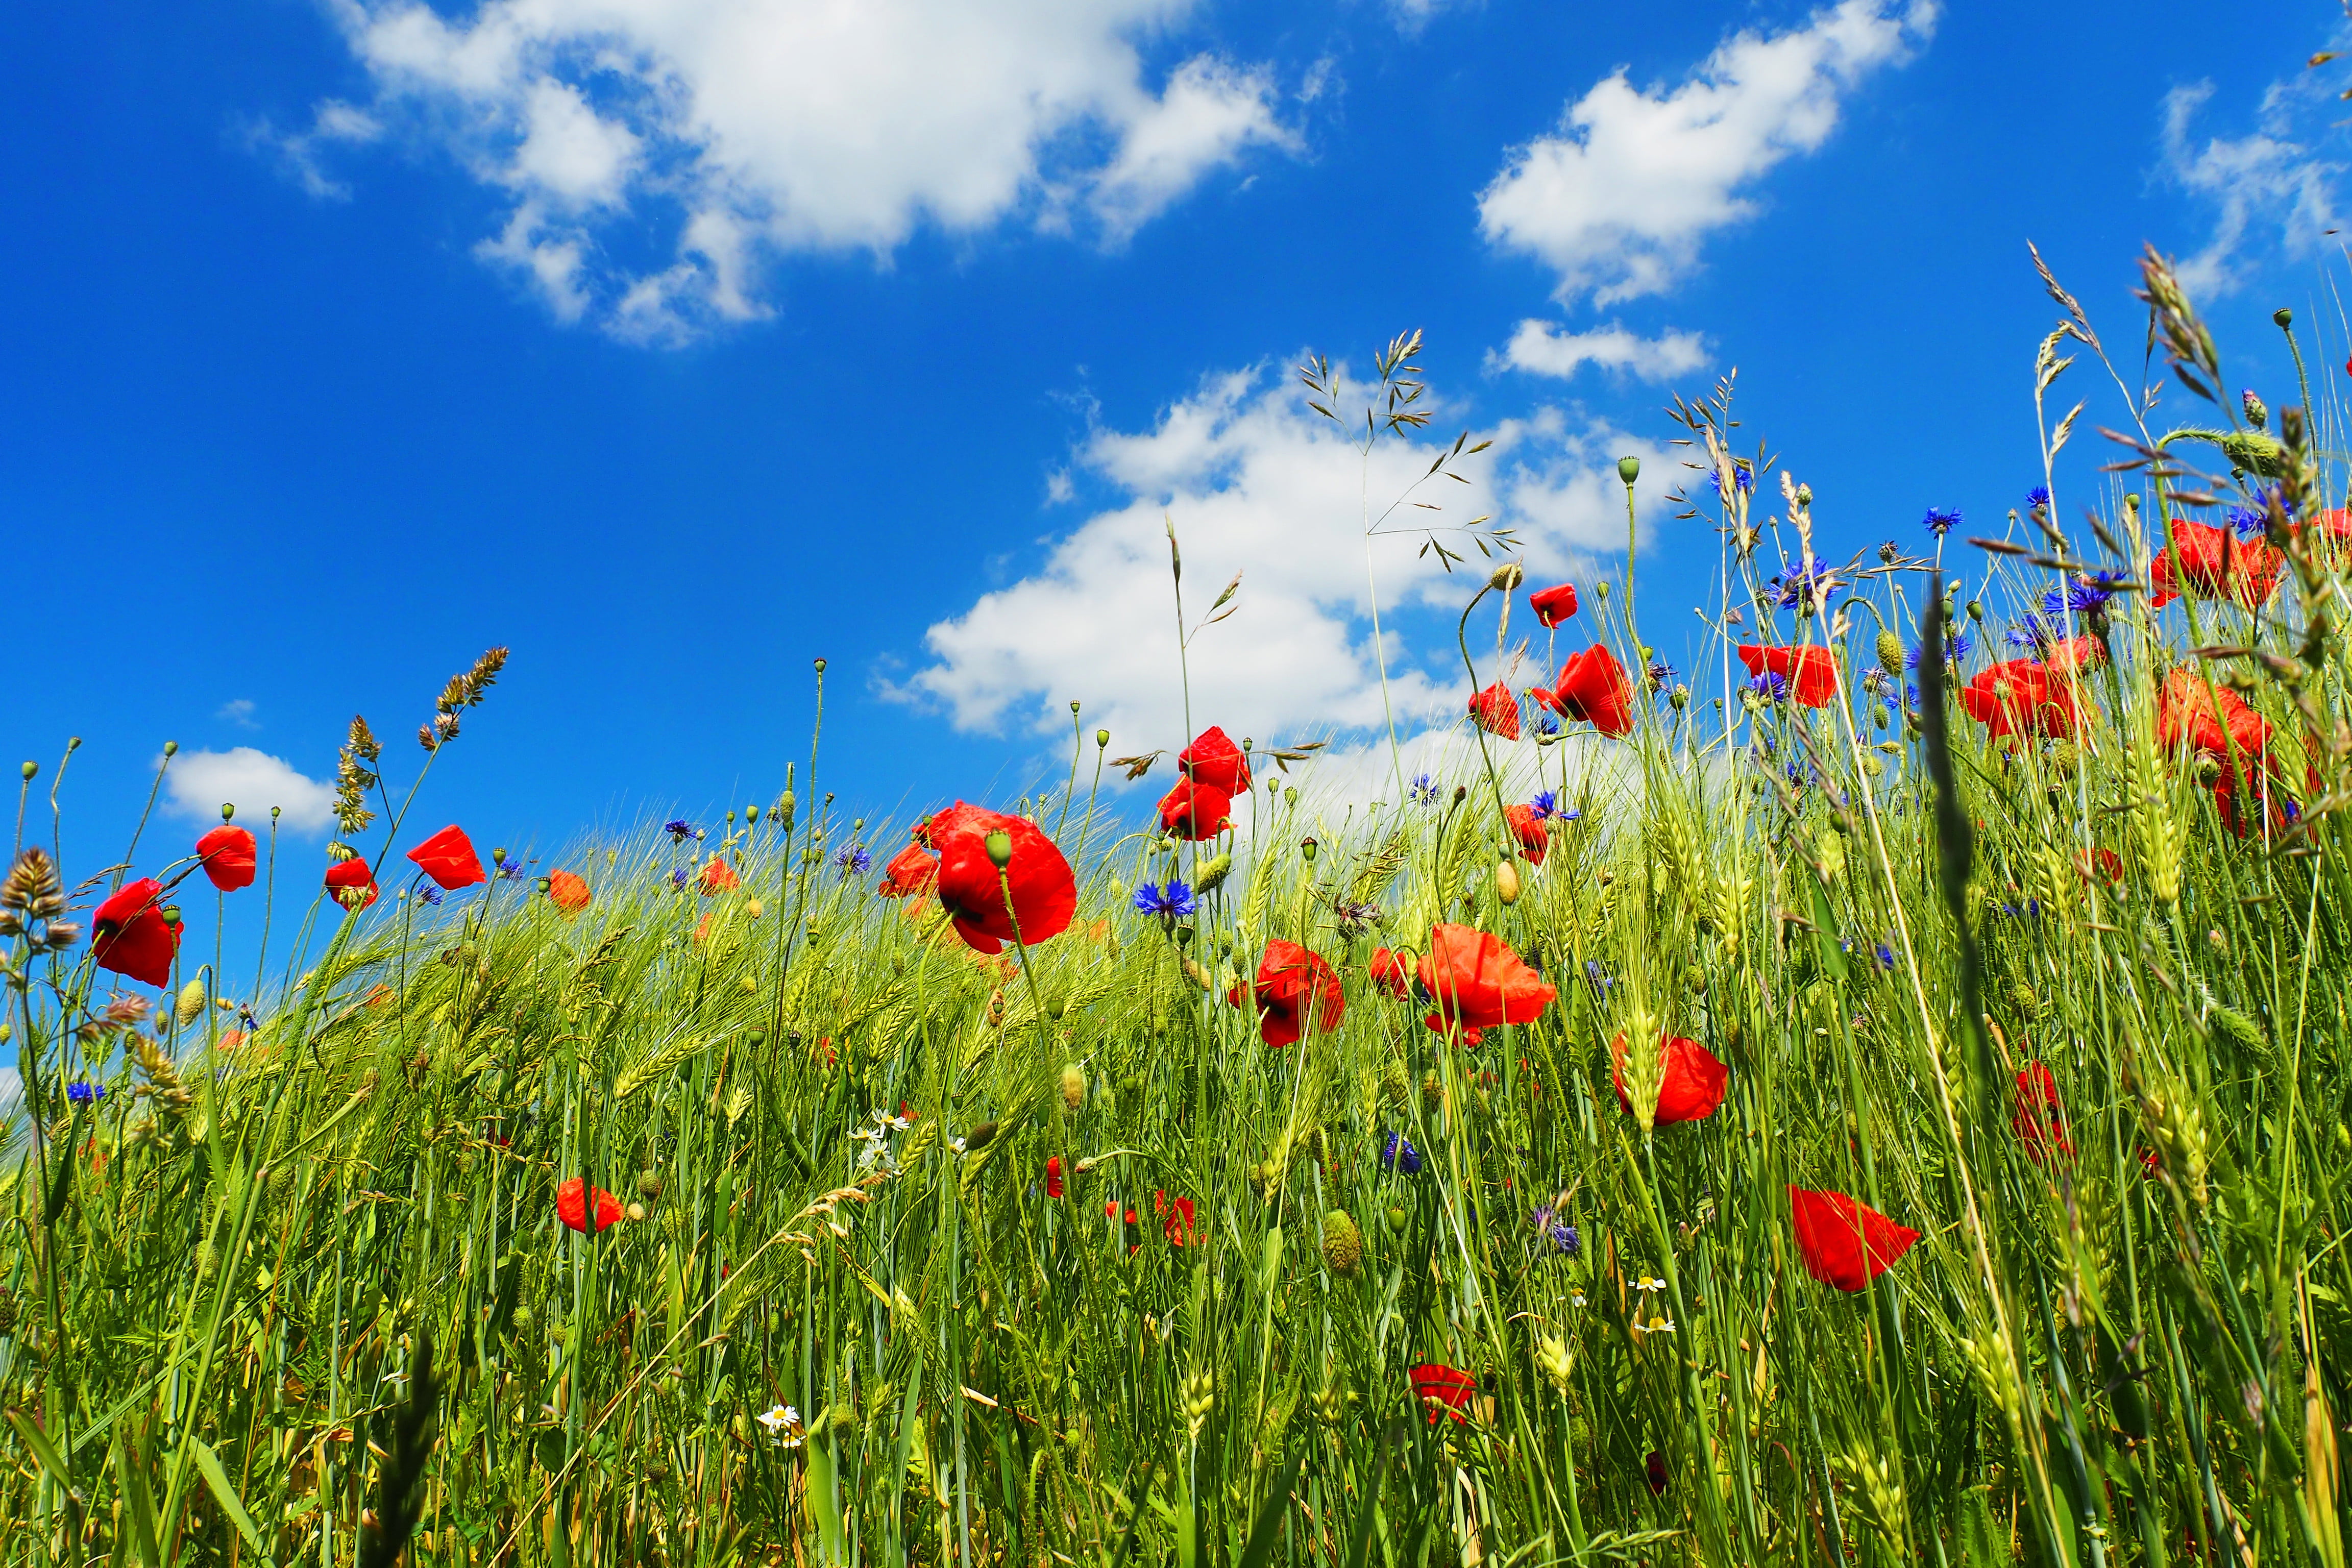 red petaled flowers under white clouds and blue skies